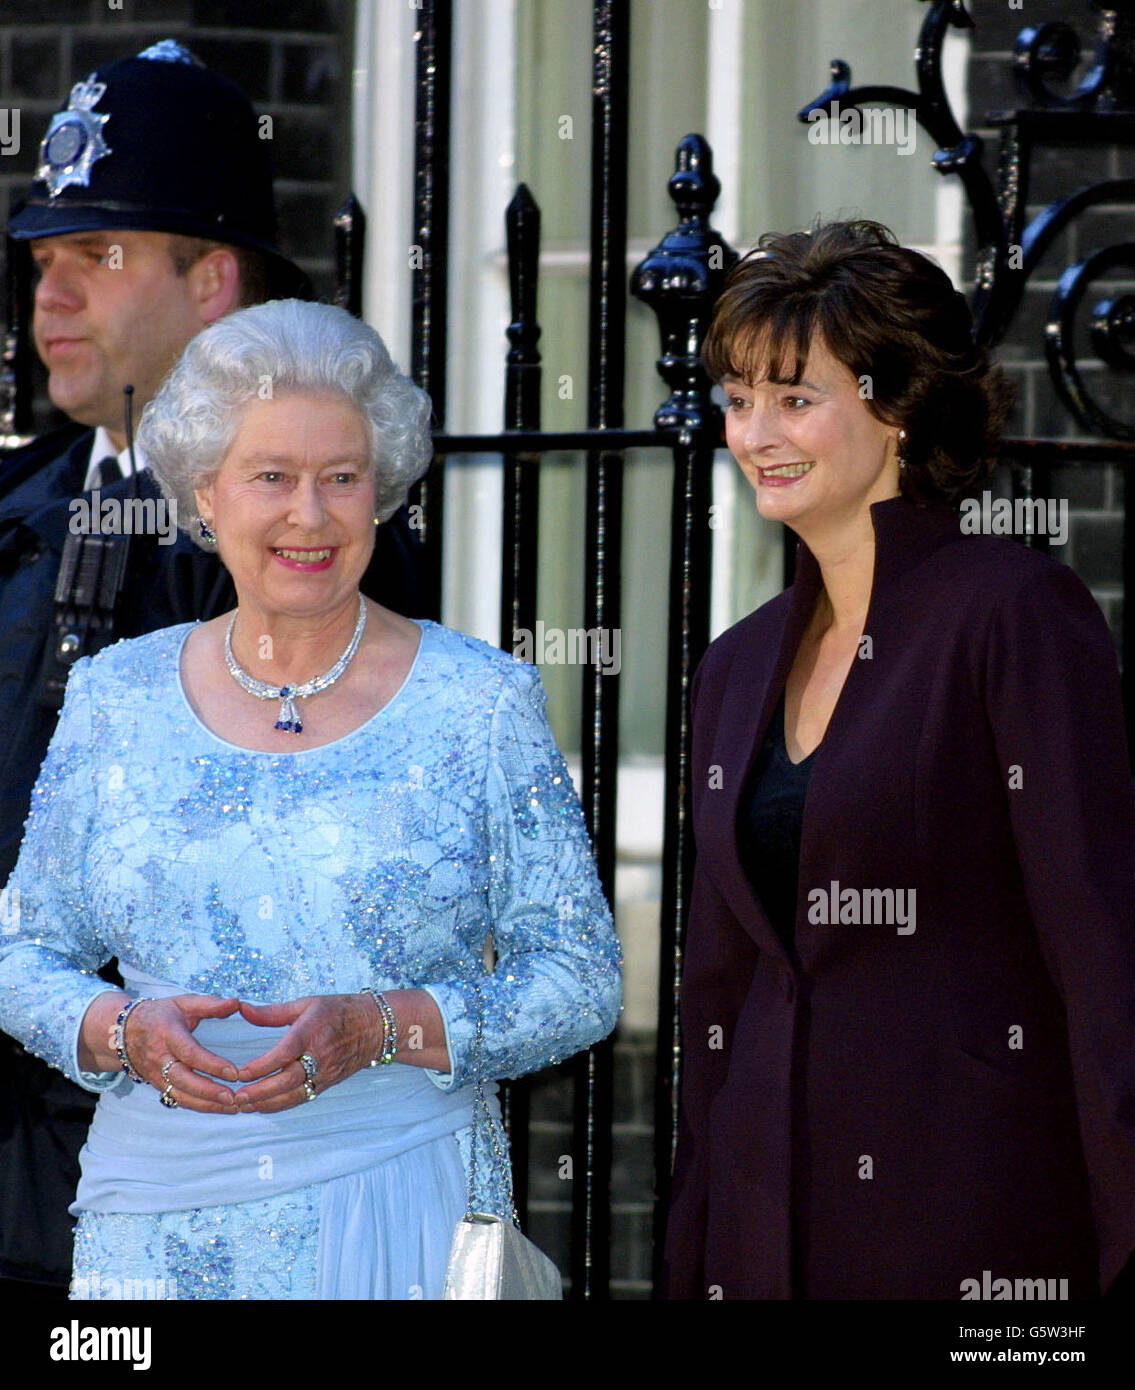 Queen Elizabeth II stands alongside Cherie, the wife of British Prime Minister Tony Blair, outside 10 Downing Street, where Mr Blair was hosting a celebratory royal Golden Jubilee dinner. The Queen, the Duke of Edinburgh and four former Prime Ministers were attending along with the relatives of five other prime ministers who held power during the Queen's 50-year reign but have since died. Stock Photo